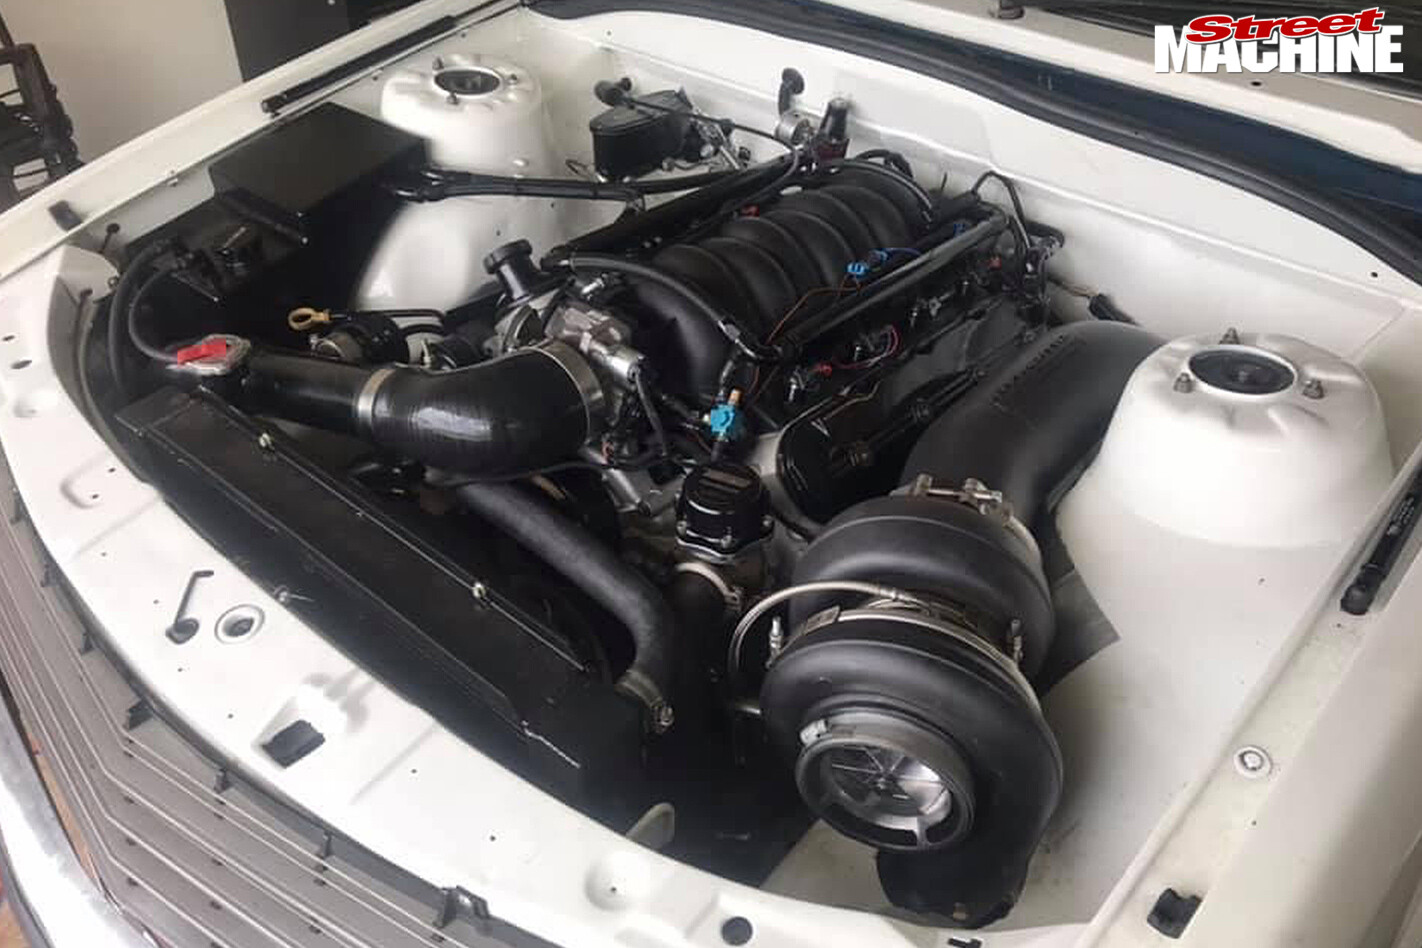 Holden VC Commodore engine bay